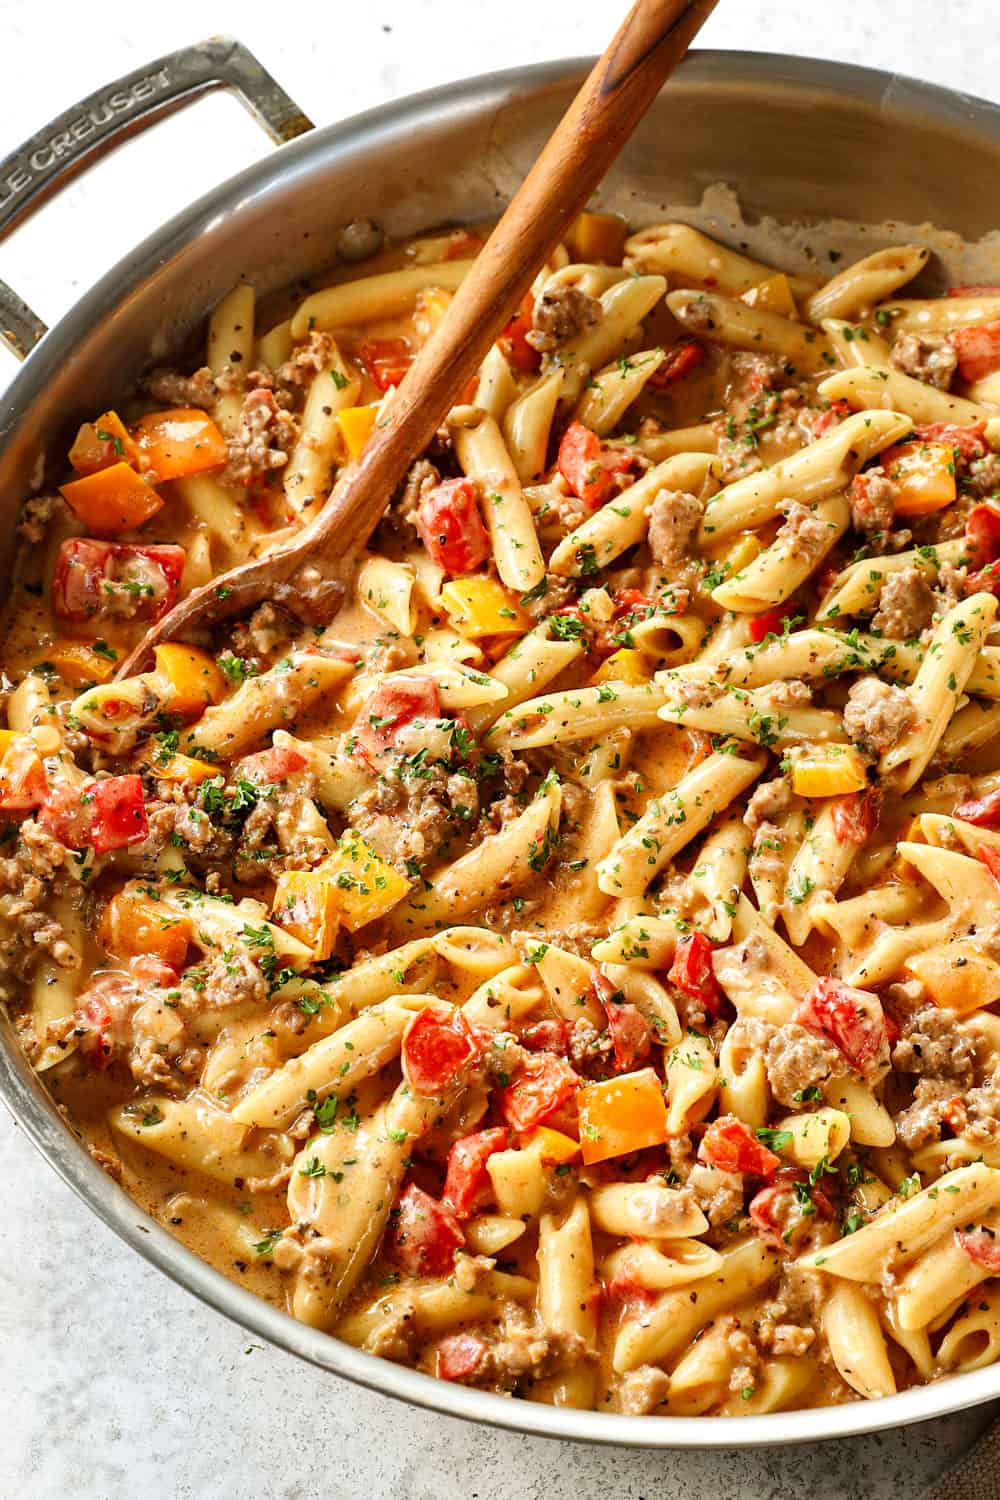 showing how to make Italian sausage pepper pasta recipe by combining pasta, sausage, peppers and sauce in a skillet